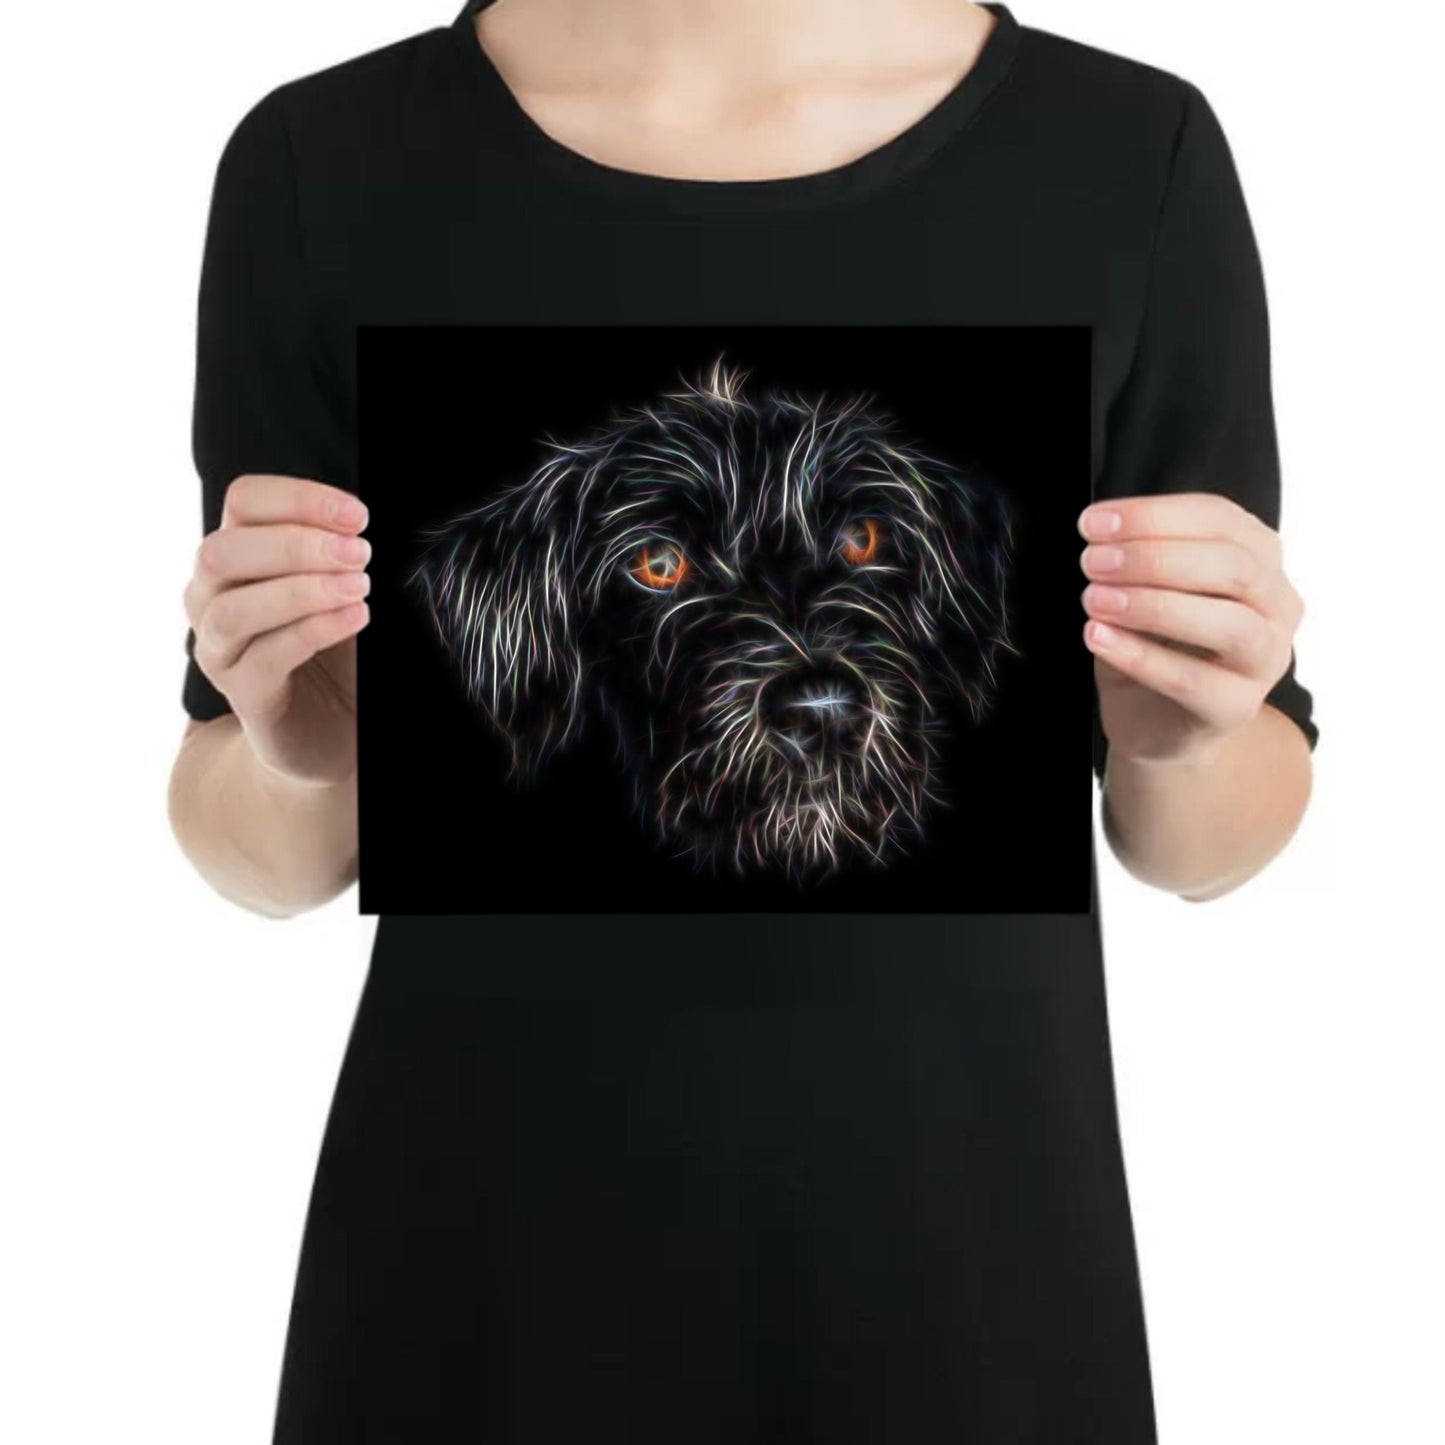 Black Jackapoo Print with Stunning Fractal Art Design. Various Sizes Available